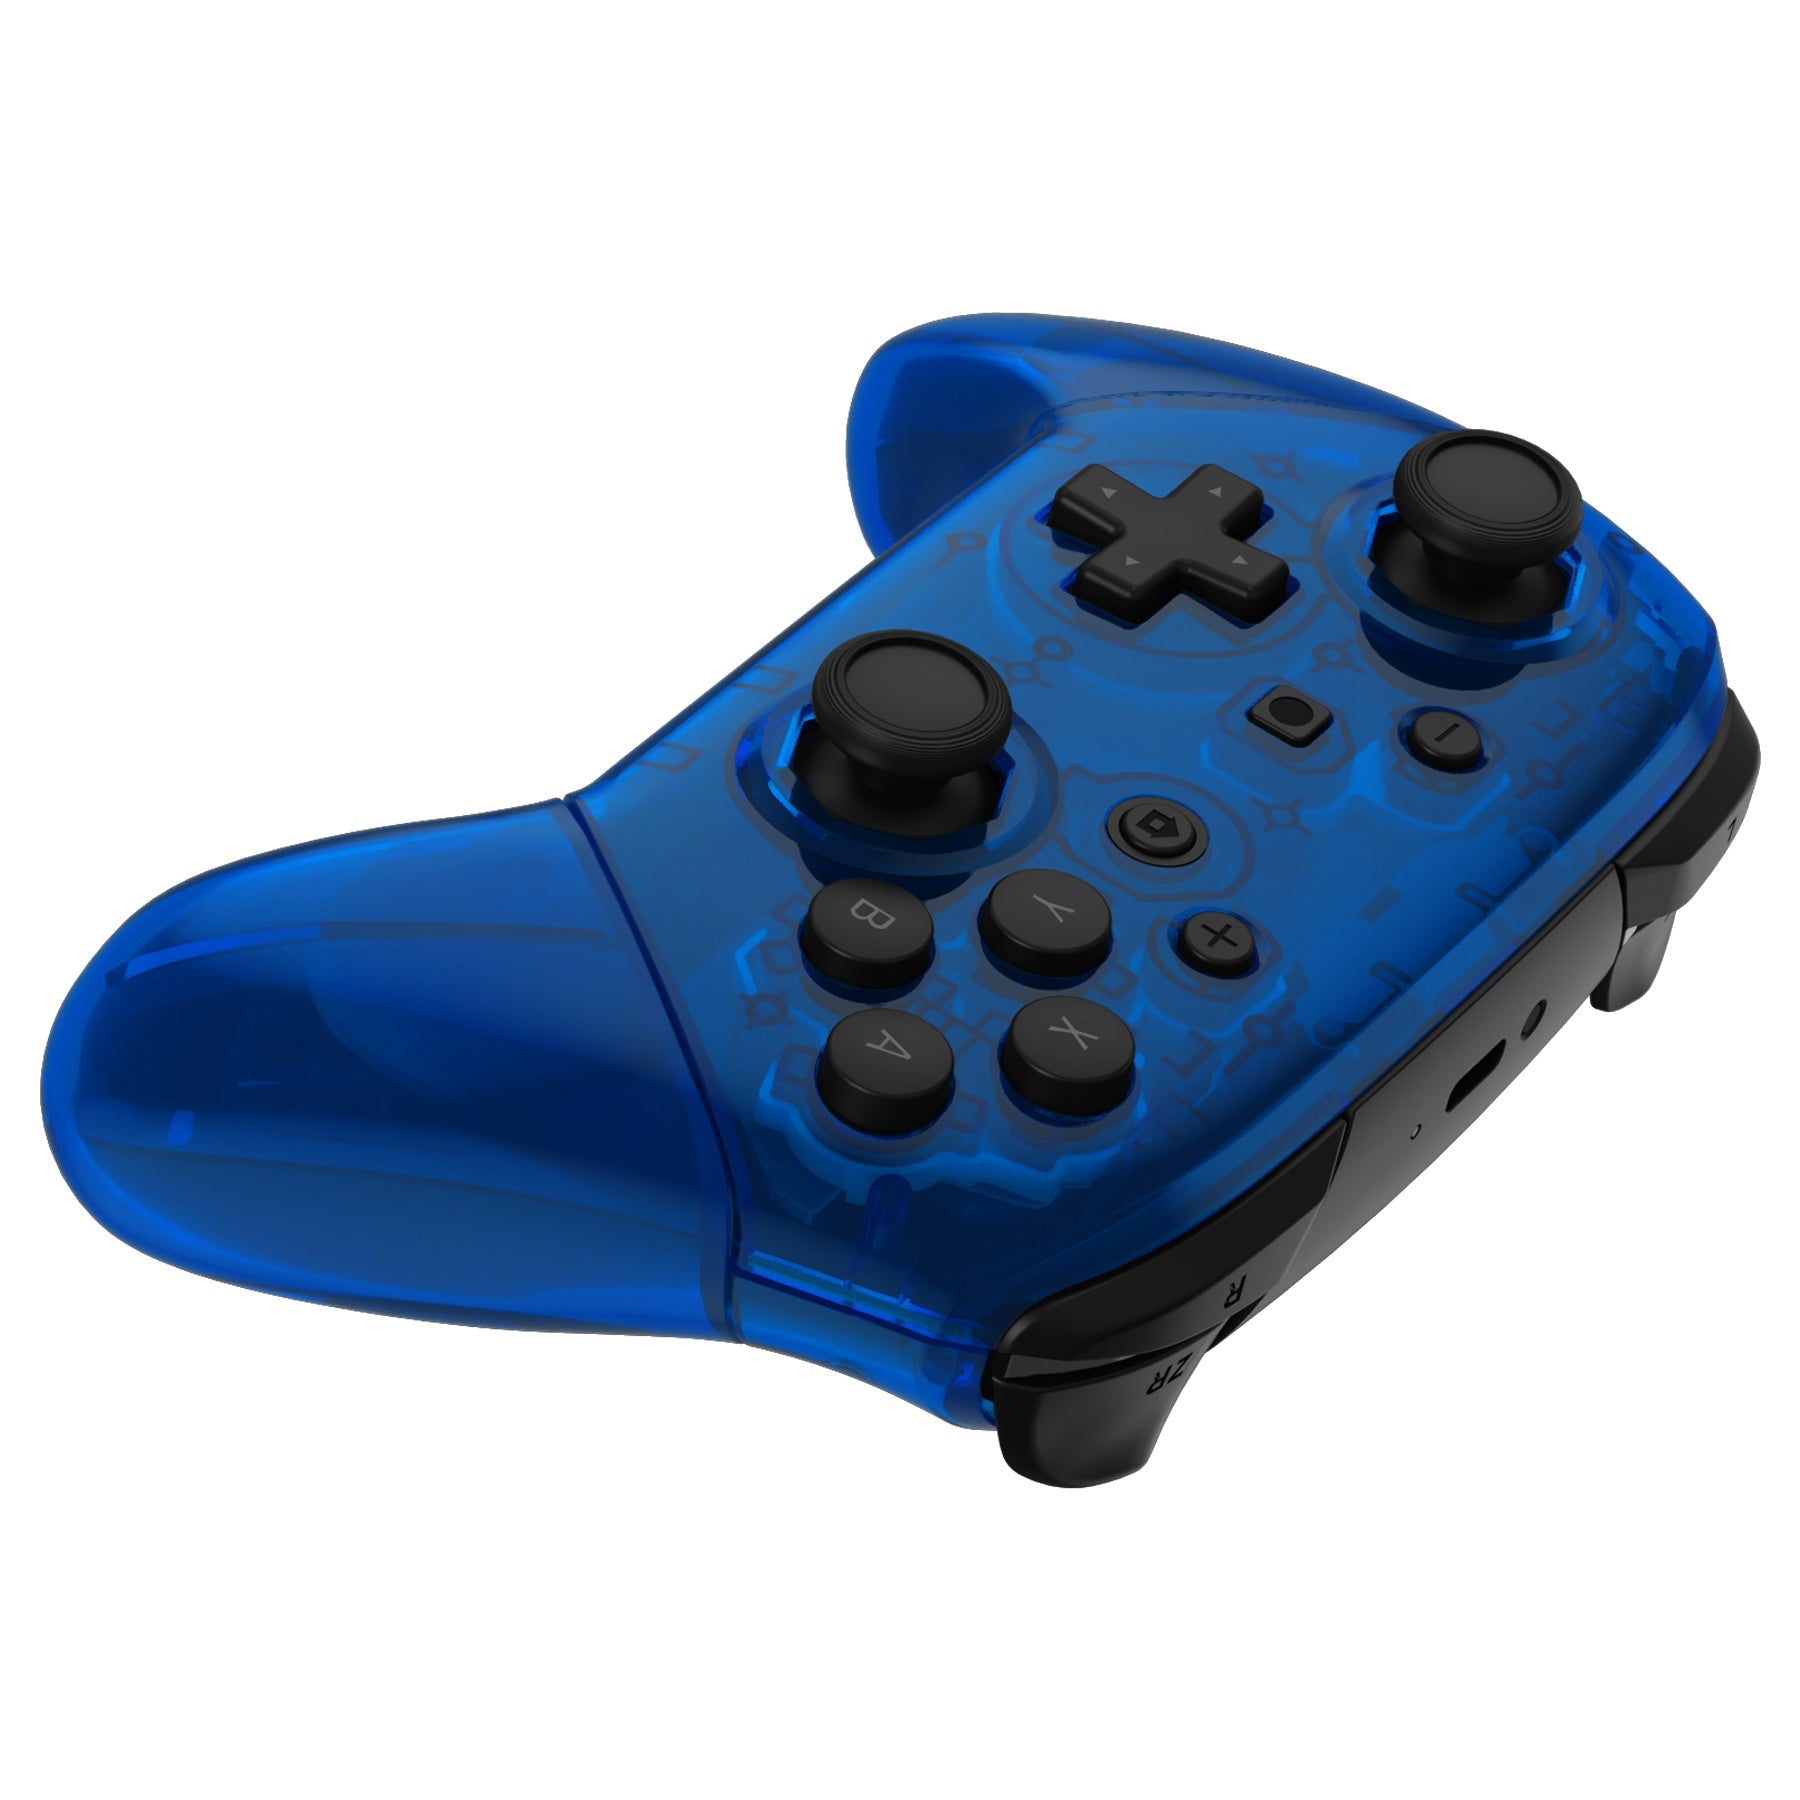 eXtremeRate Retail Clear Blue Octagonal Gated Sticks Faceplate Backplate Handles, DIY Replacement Grip Housing Shell Cover for NS Switch Pro Controller - Controller NOT Included - FRE616